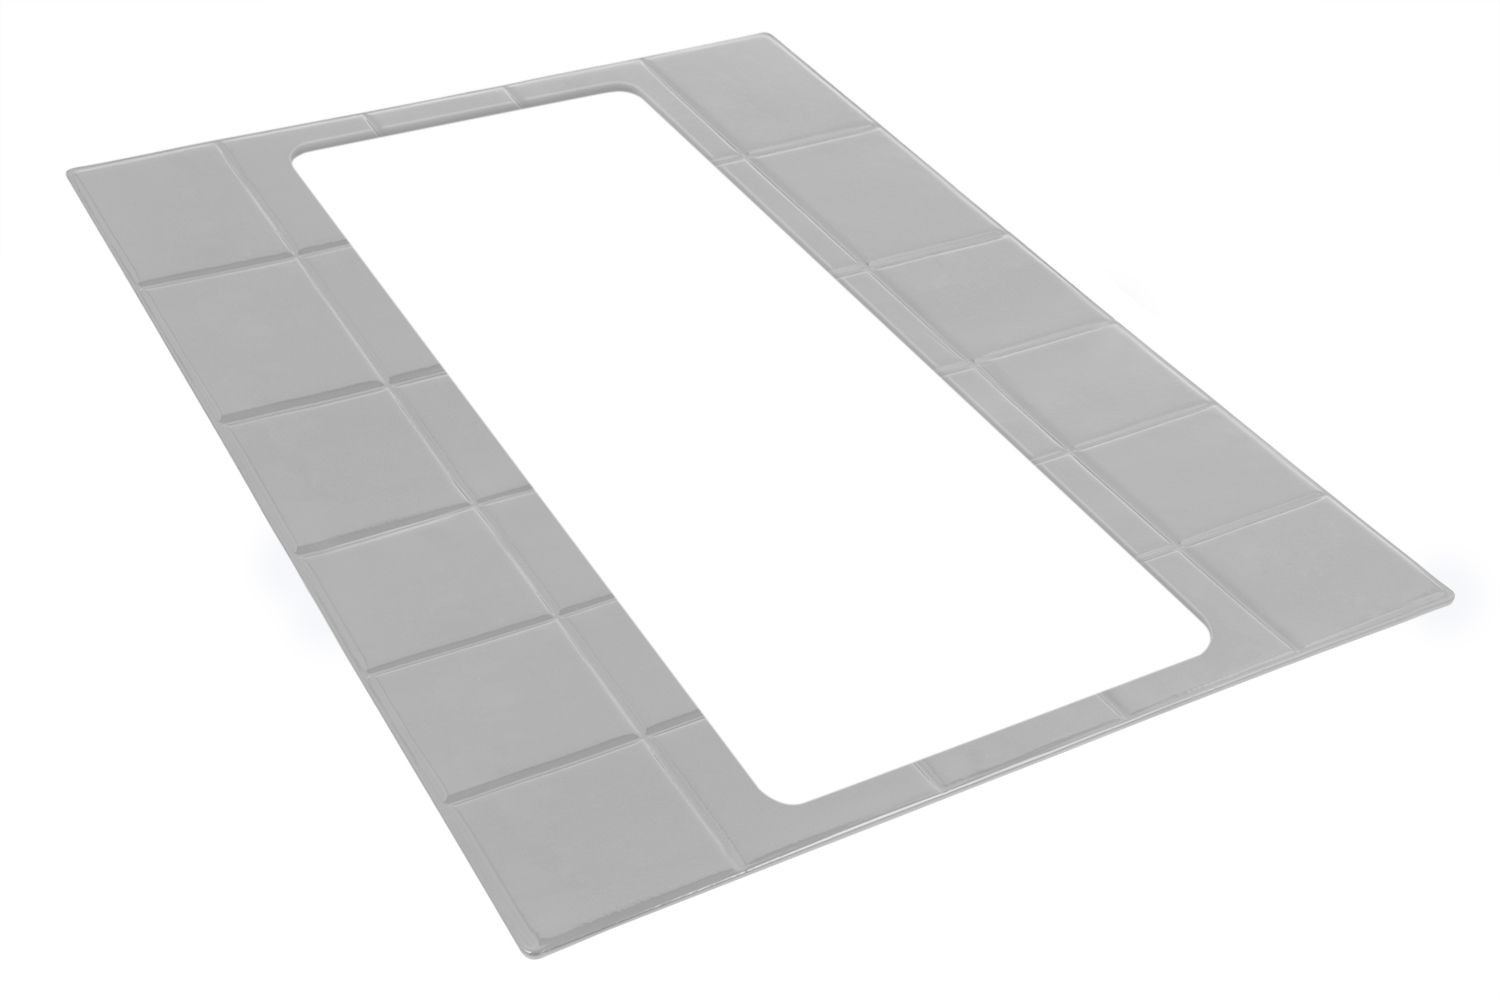 Bon Chef 52037P EZ Fit Double Size Tile Tray for 5101, Pewter Glo 25 1/2" x 20 3/16"